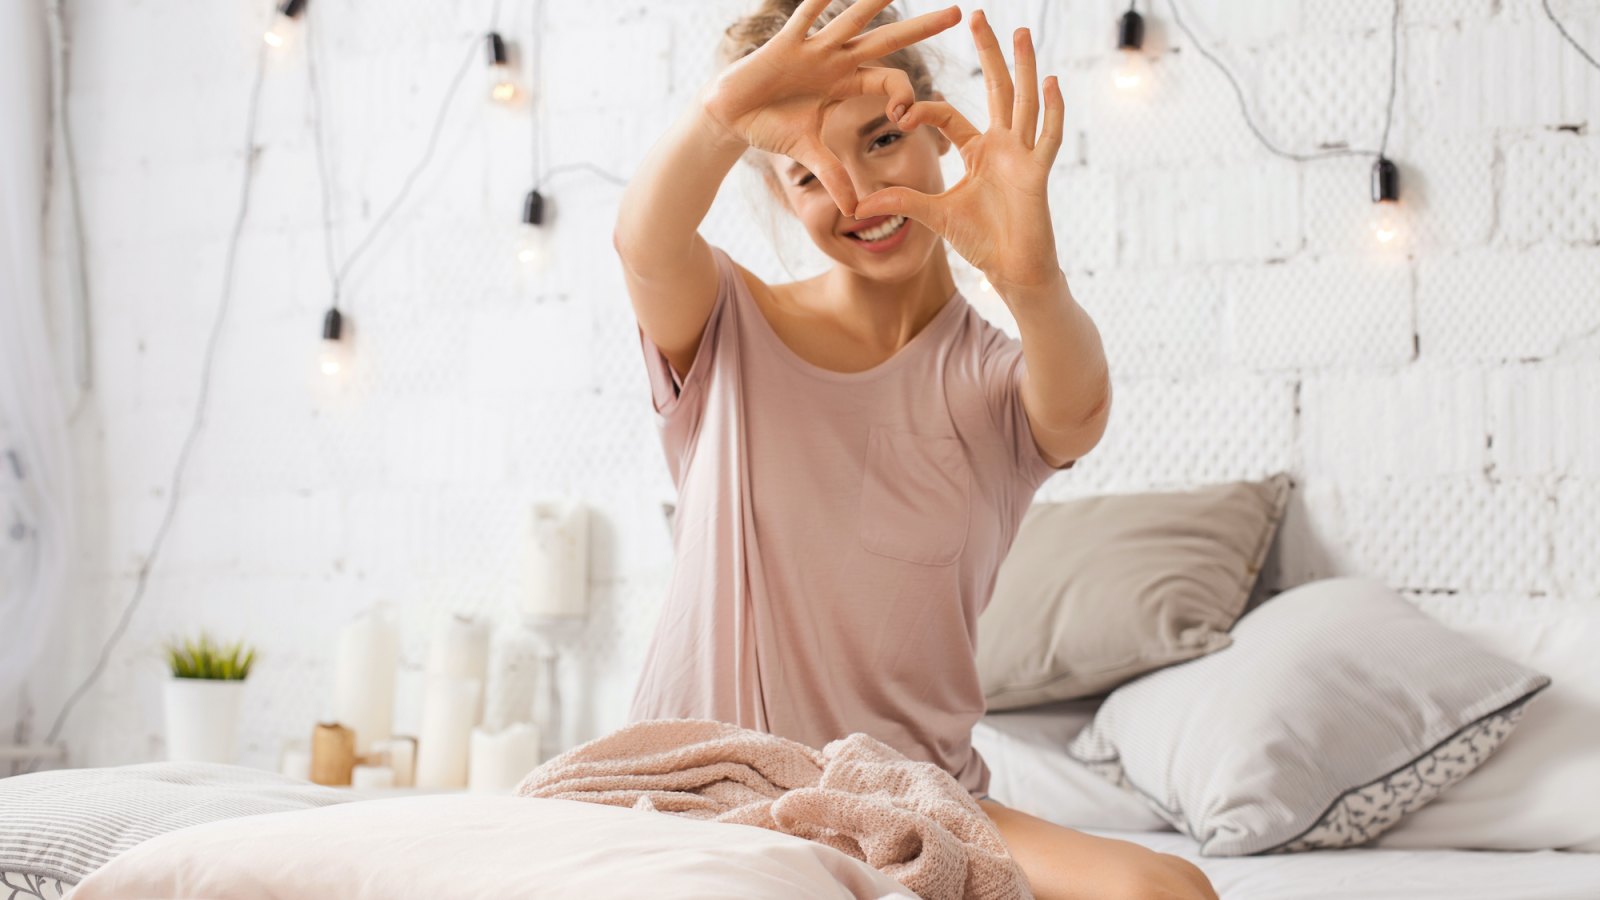 Woman-In-Bed-In-PJs-Stock-Photo